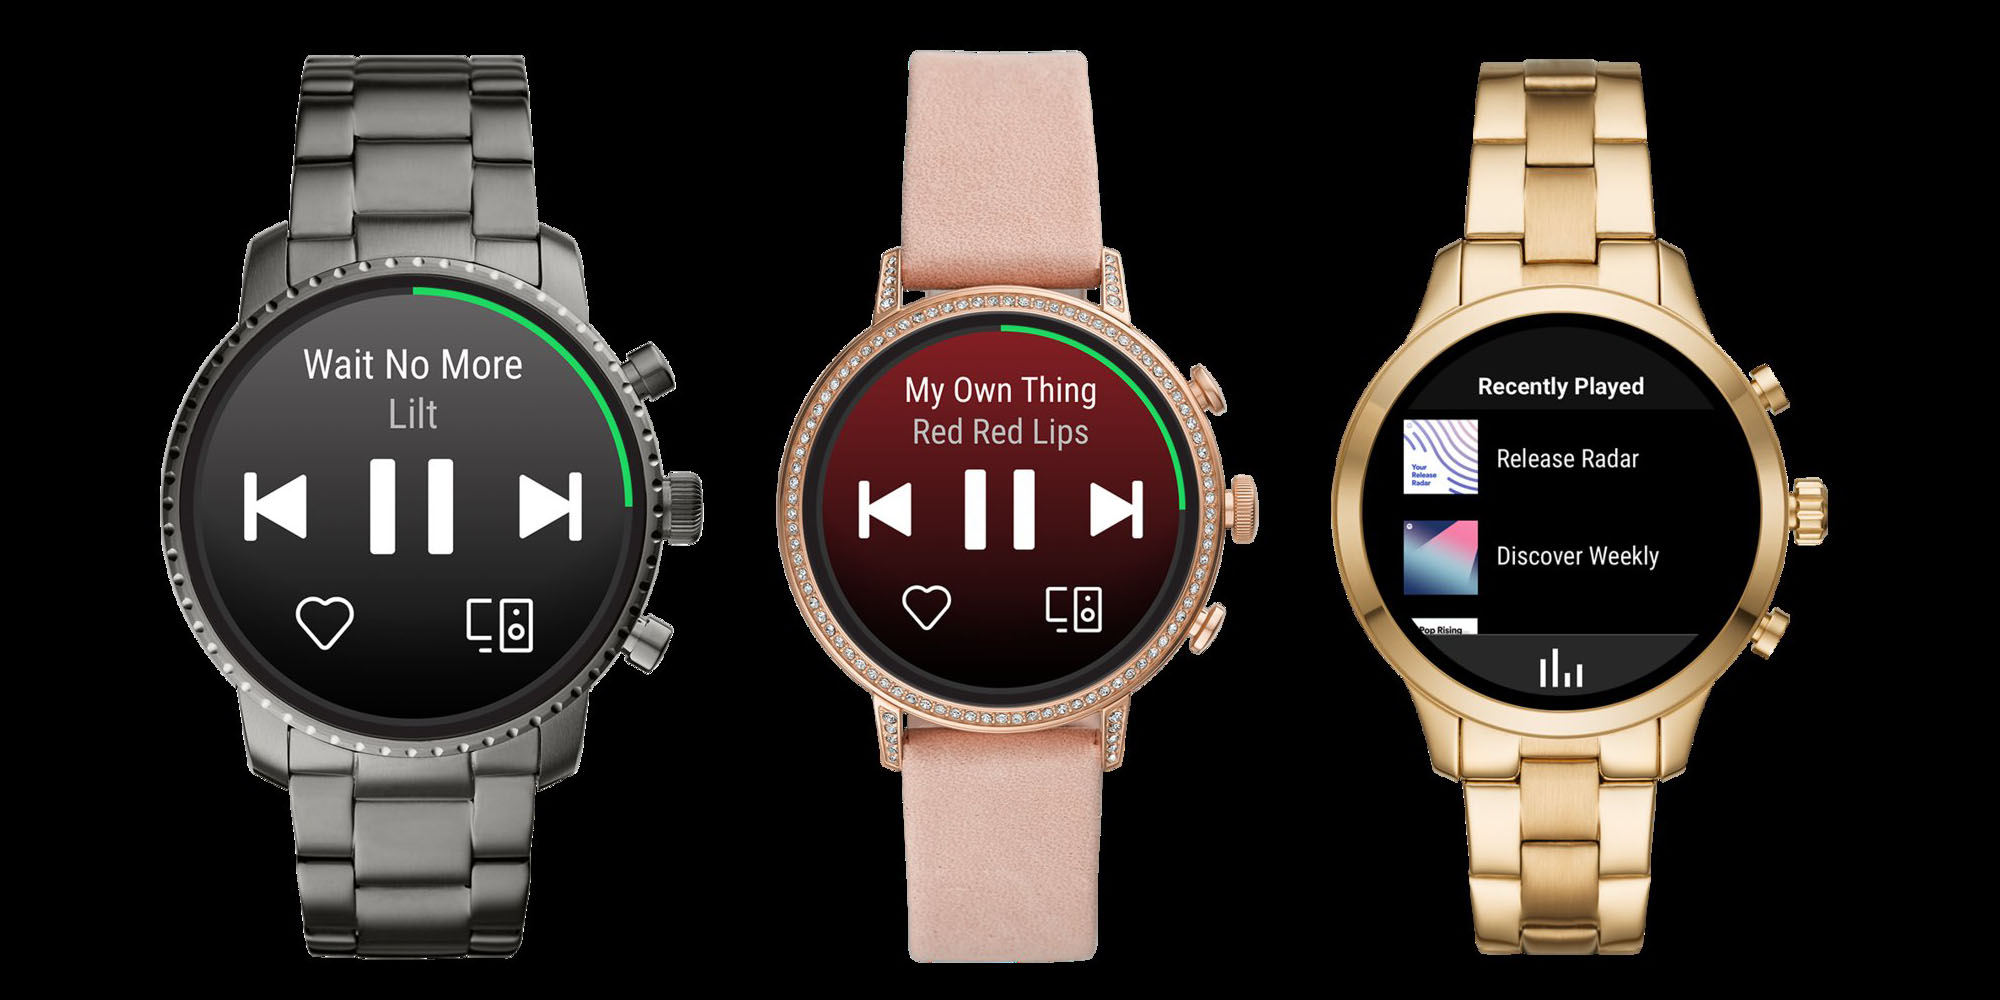 Spotify to allow offline listening on the Wear OS Smartwatch